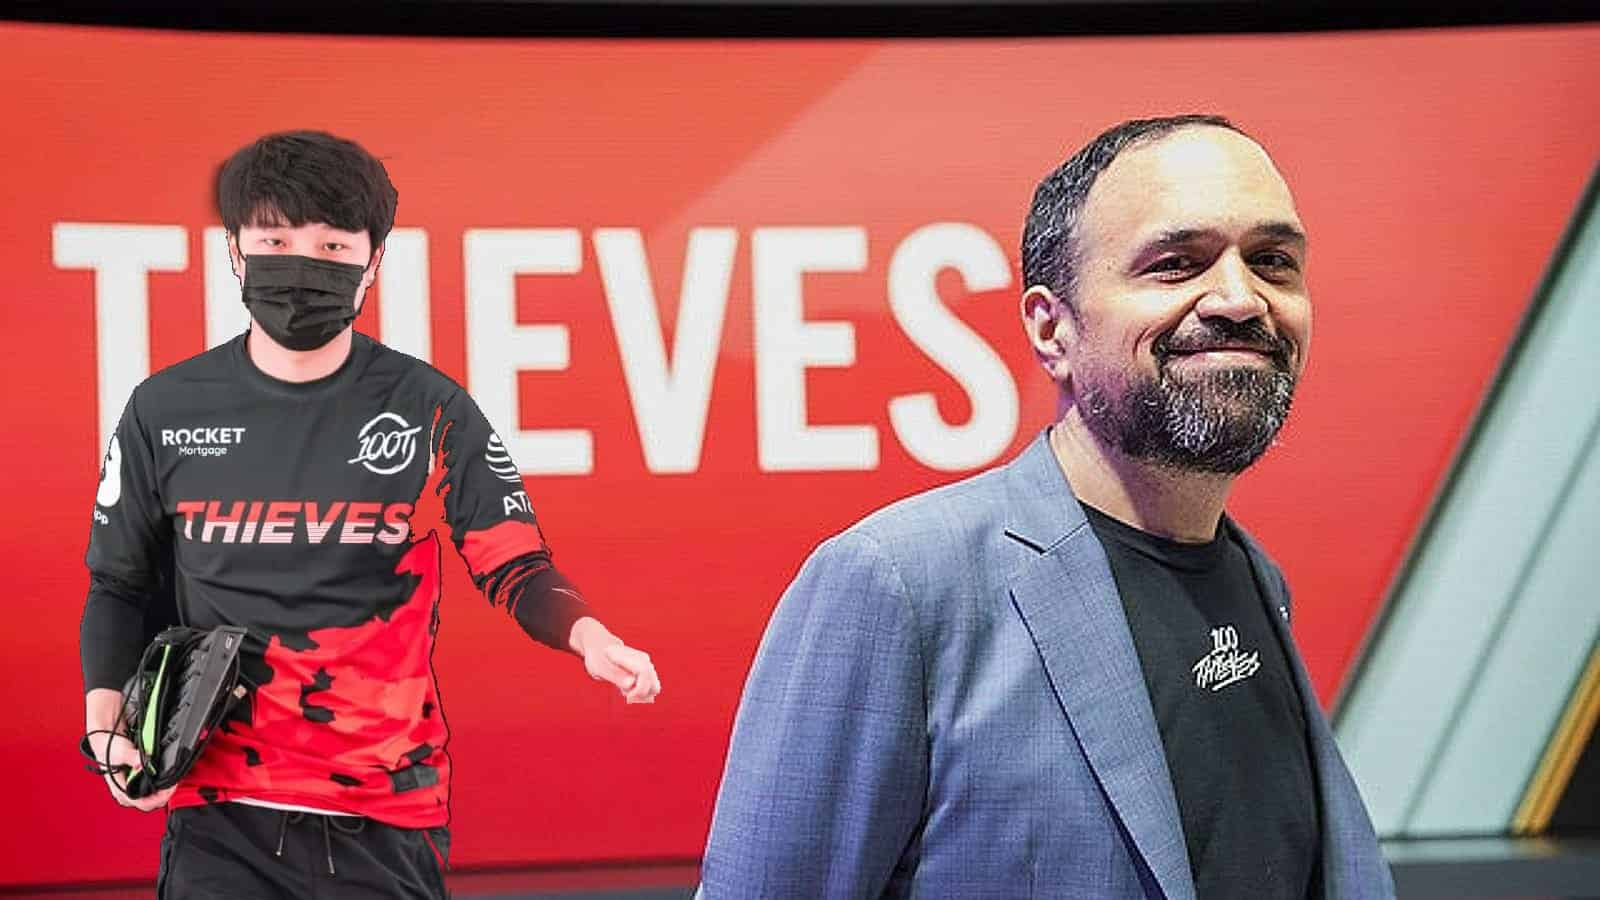 Images of PapaSmithy and Ssumday